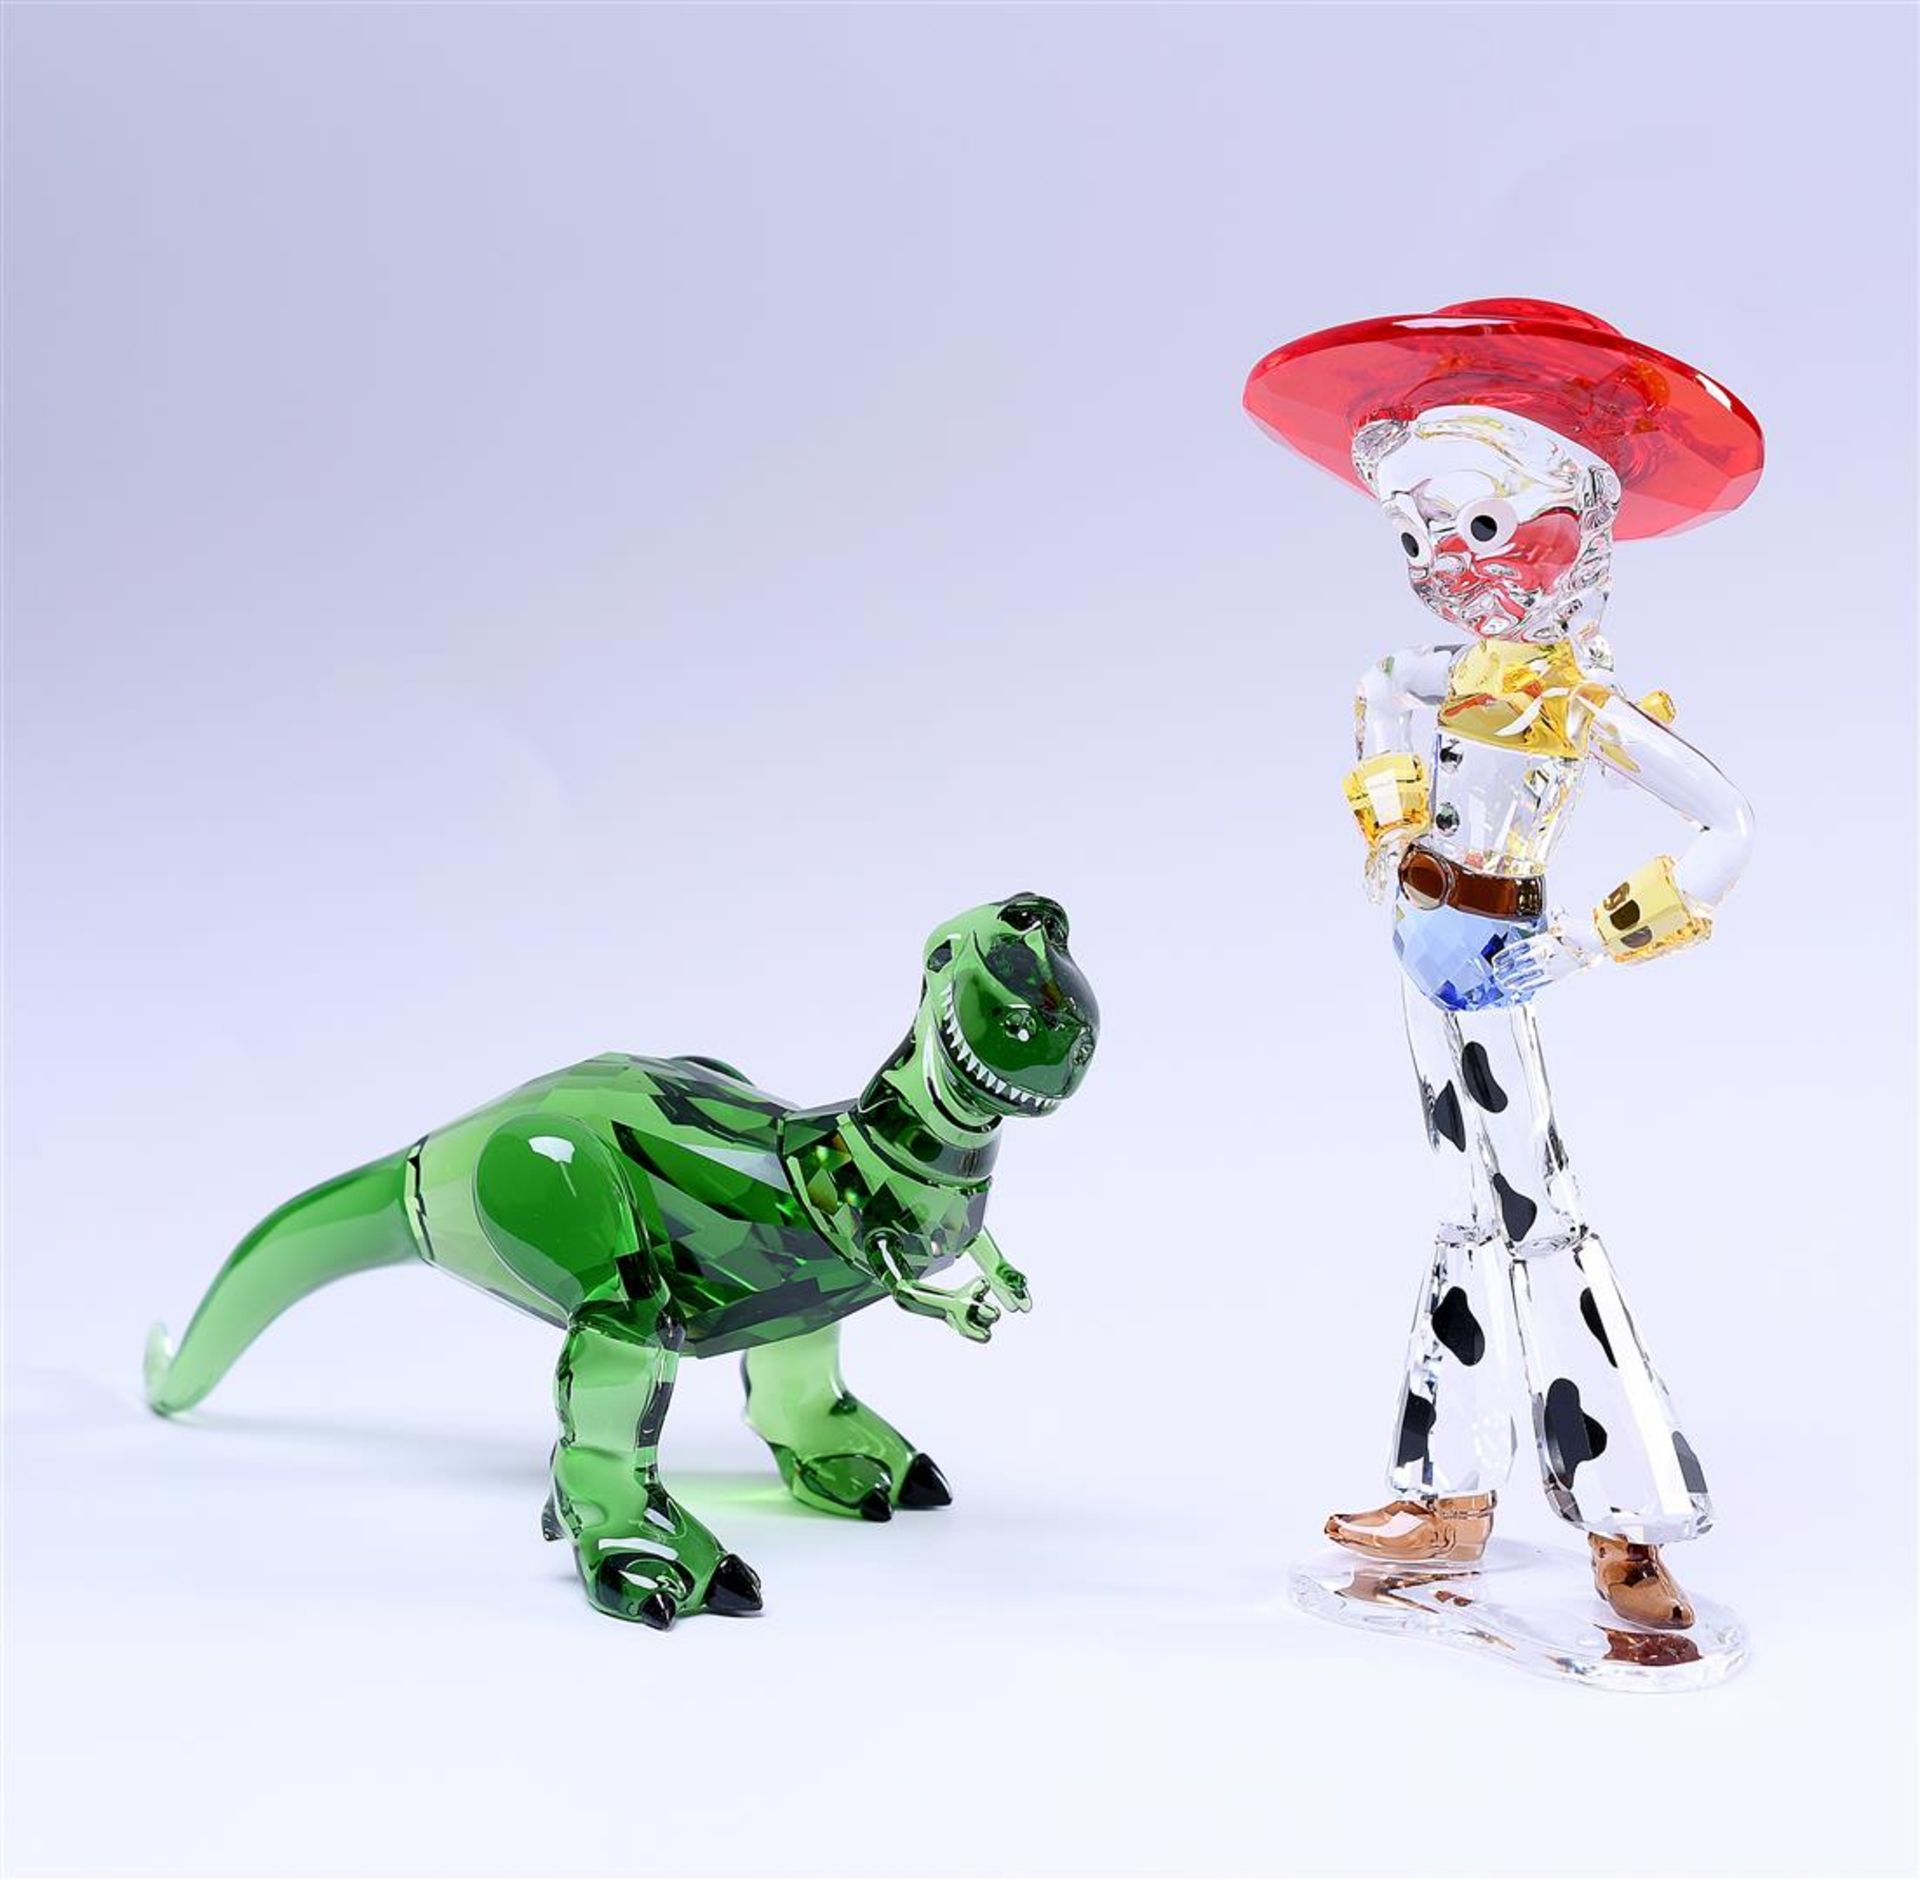 Swarovski, Toy story Rex and Jessie, 5492734 & 5492686. Year of release 2020. In original box. - Image 5 of 6